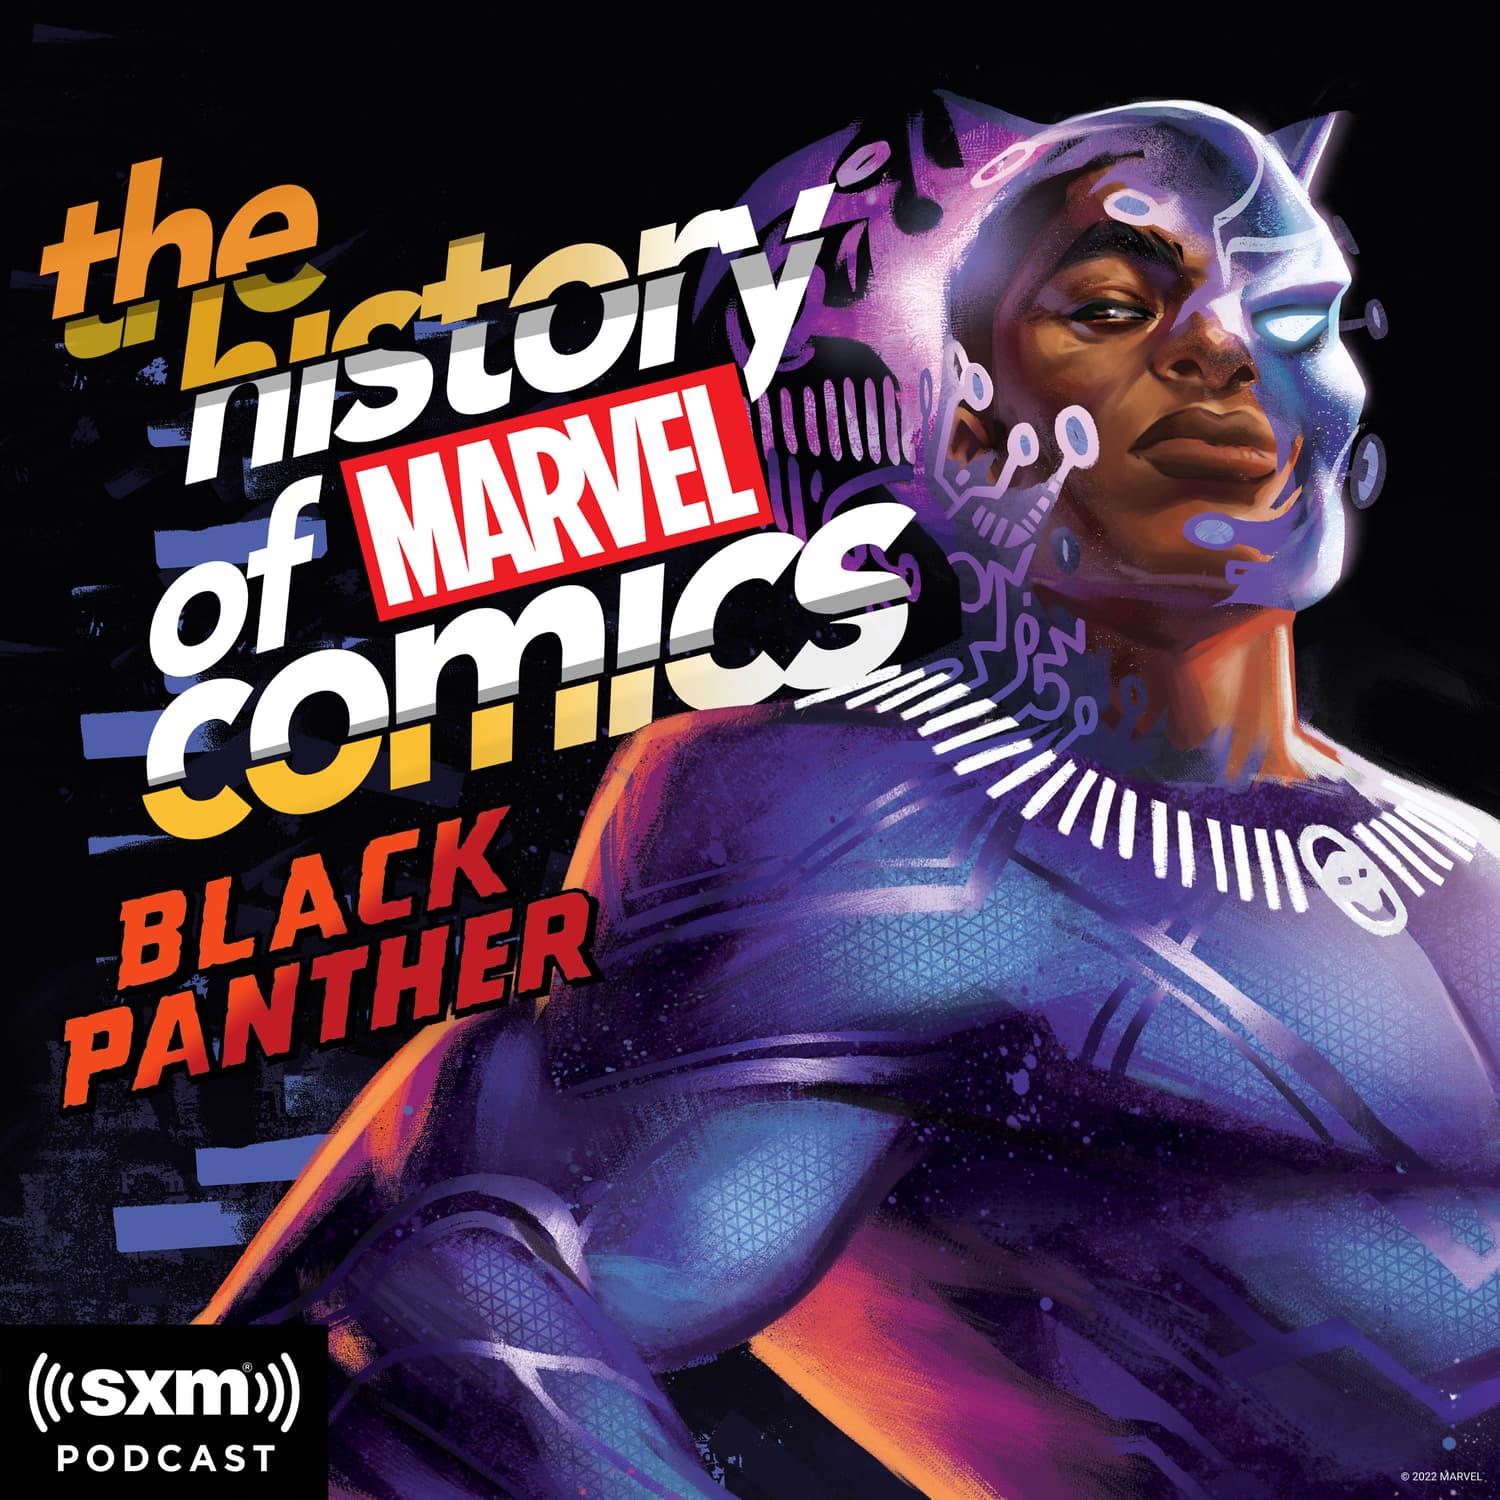 ‘The History Of Marvel Comics: Black Panther’